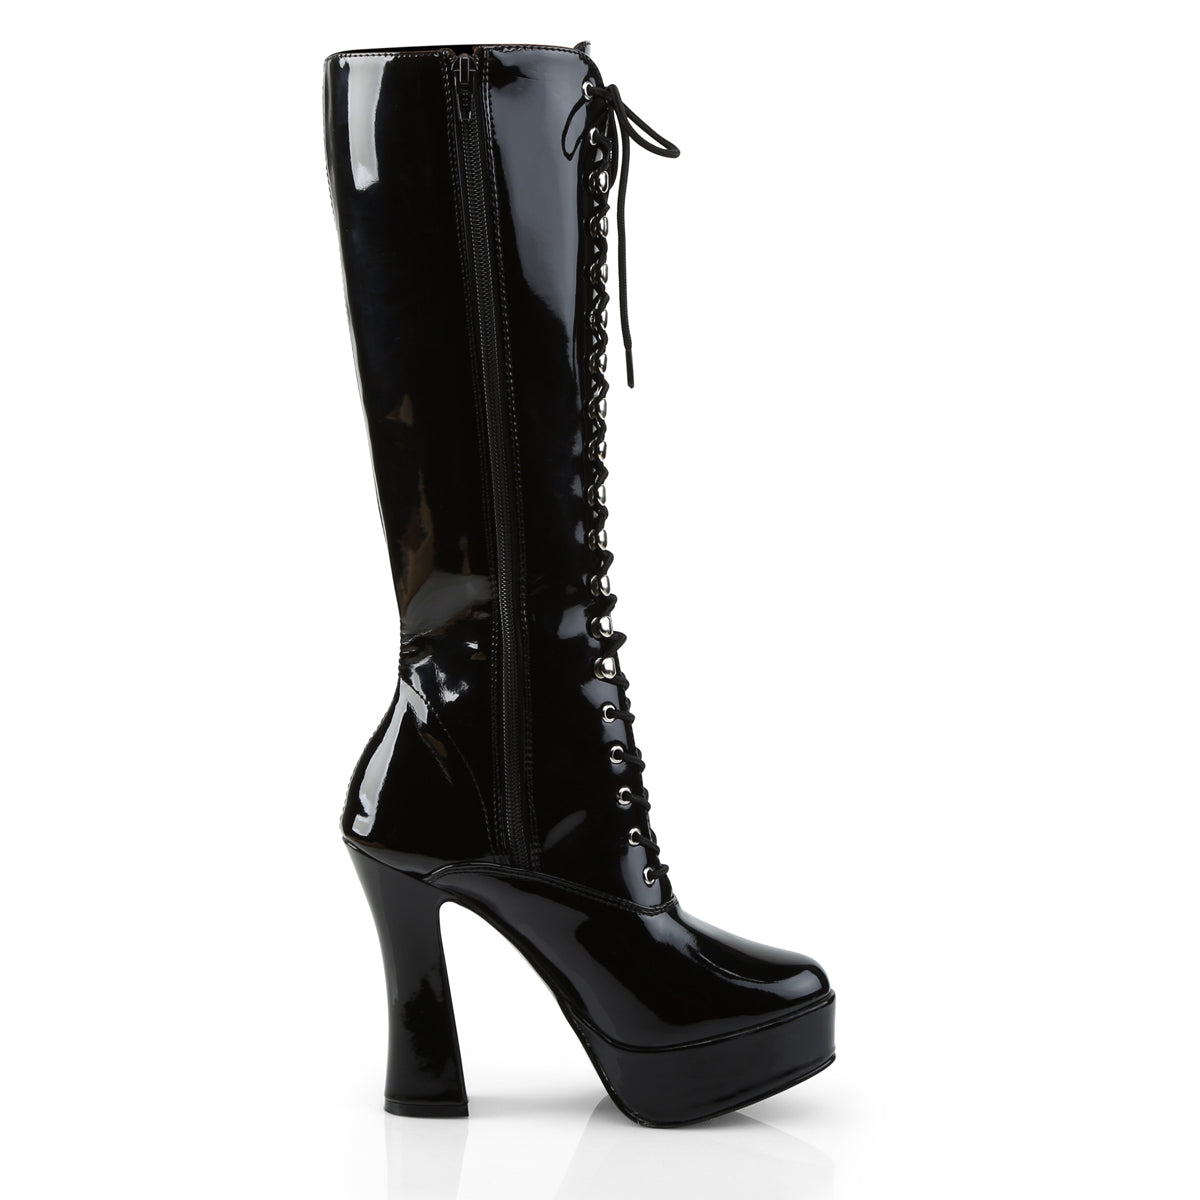 Sexy Electra Knee High Boots Black PA